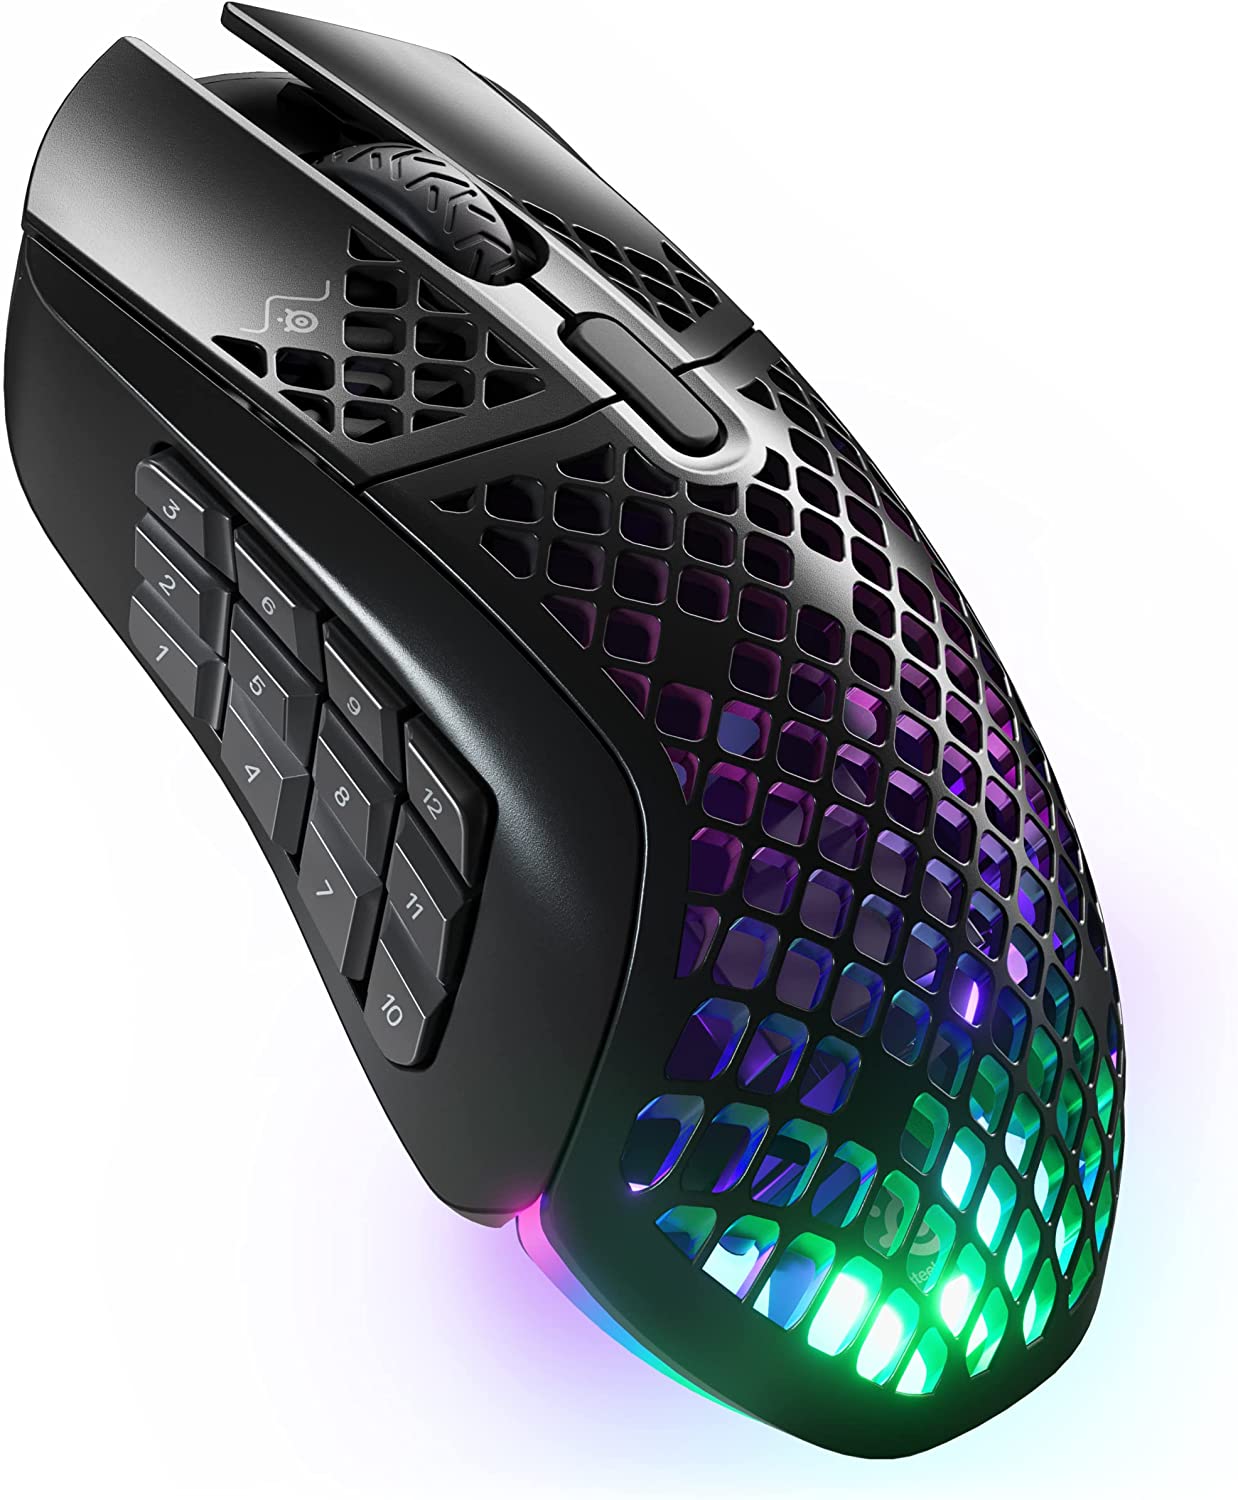 Make sure that the mouse you are looking at buying has buttons that are suitable for your type of gaming.